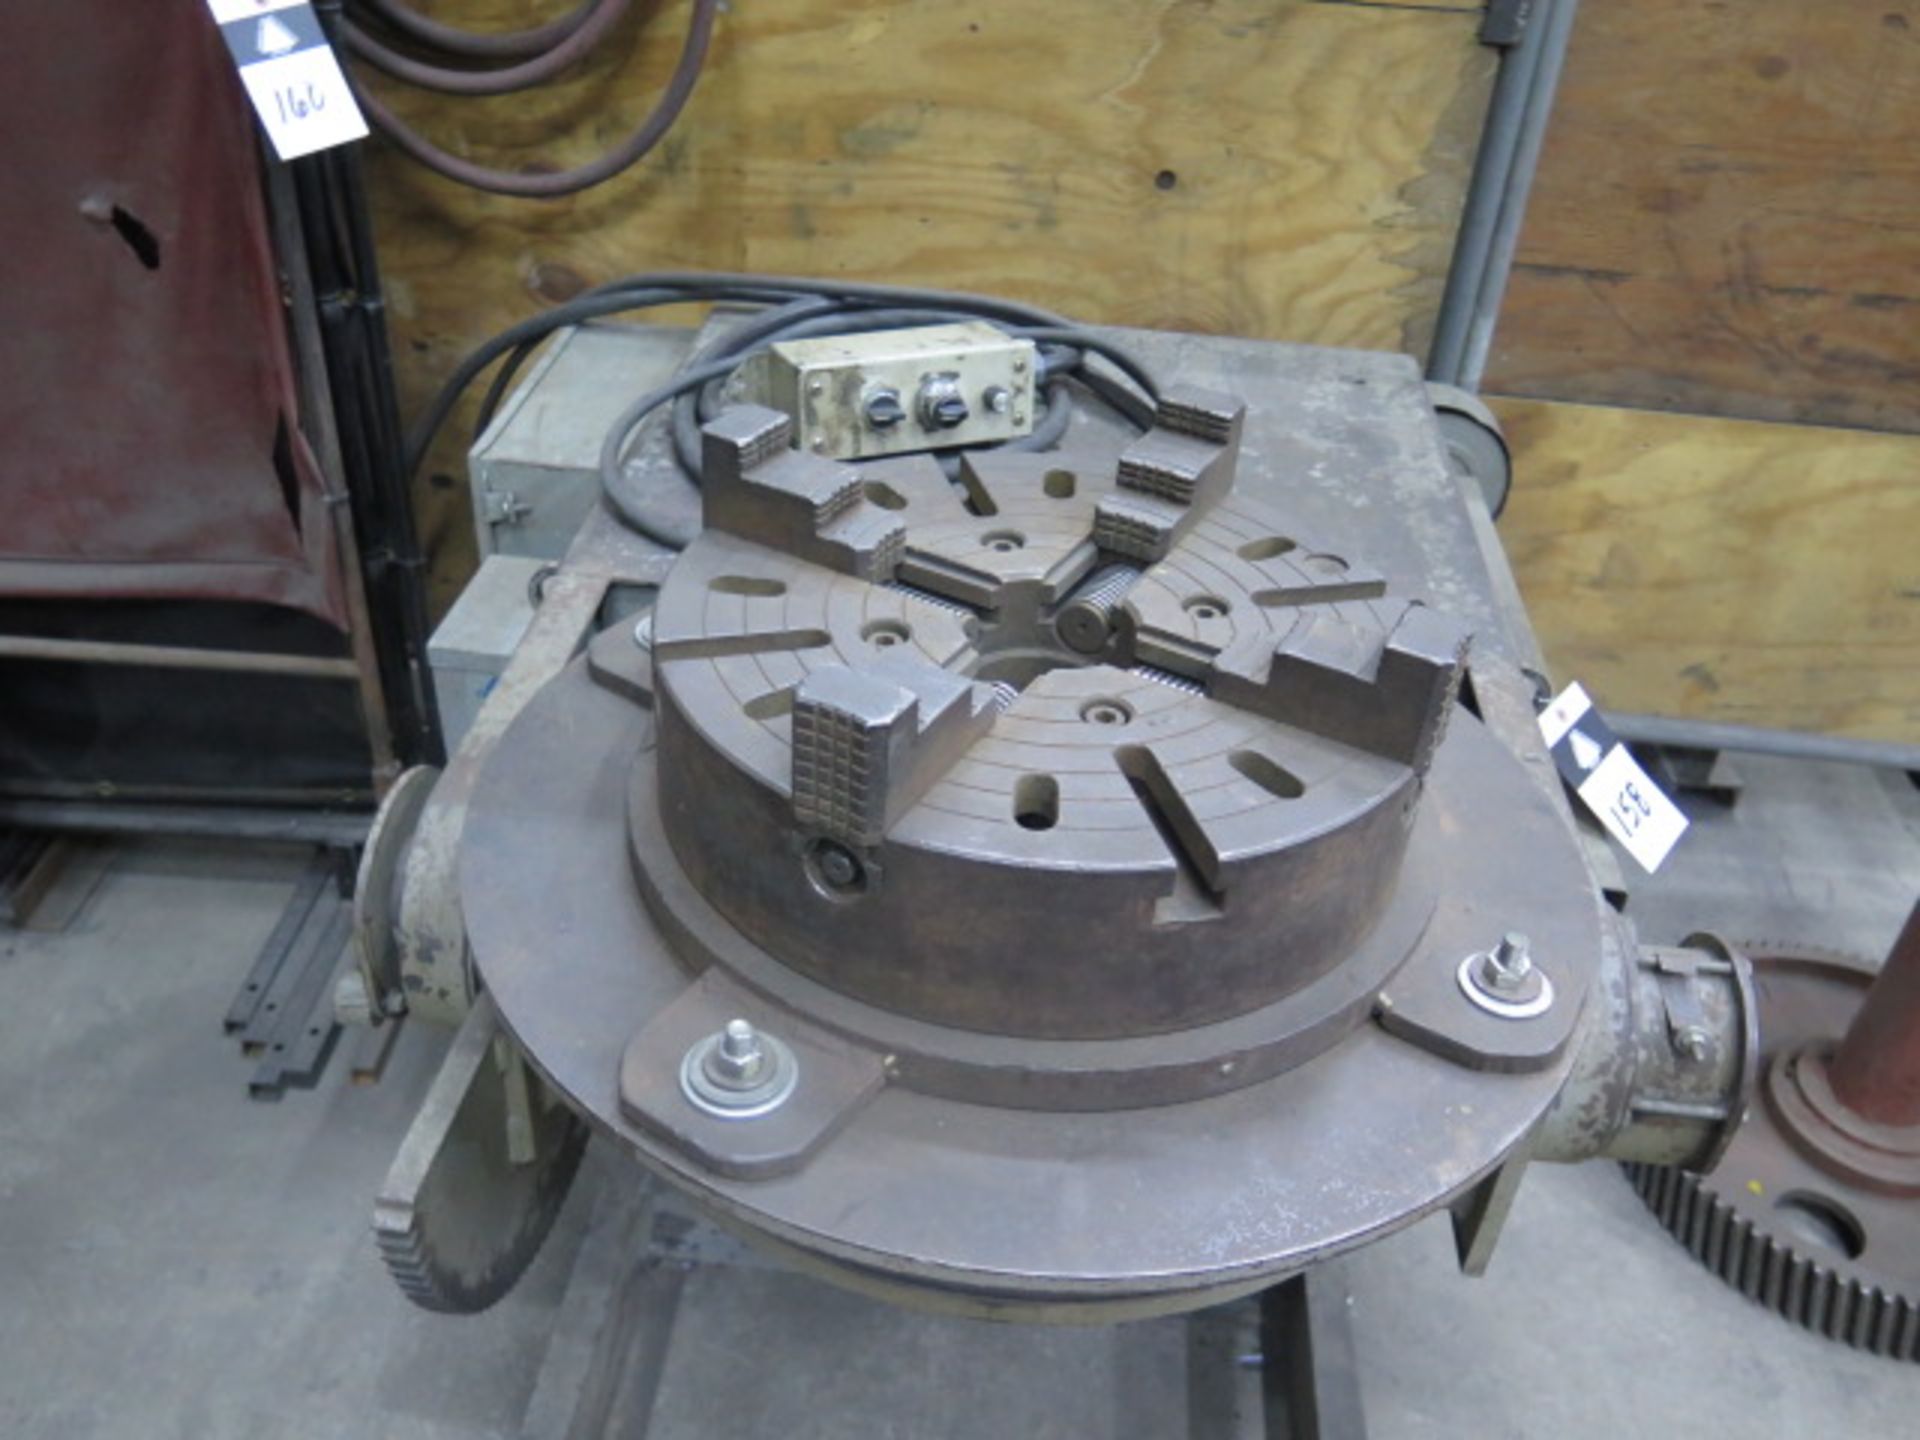 Koike Aronson 24” Welding Positioner s/n 011500 w/ 15” 4-Jaw Chuck (SOLD AS-IS - NO WARRANTY) - Image 3 of 7